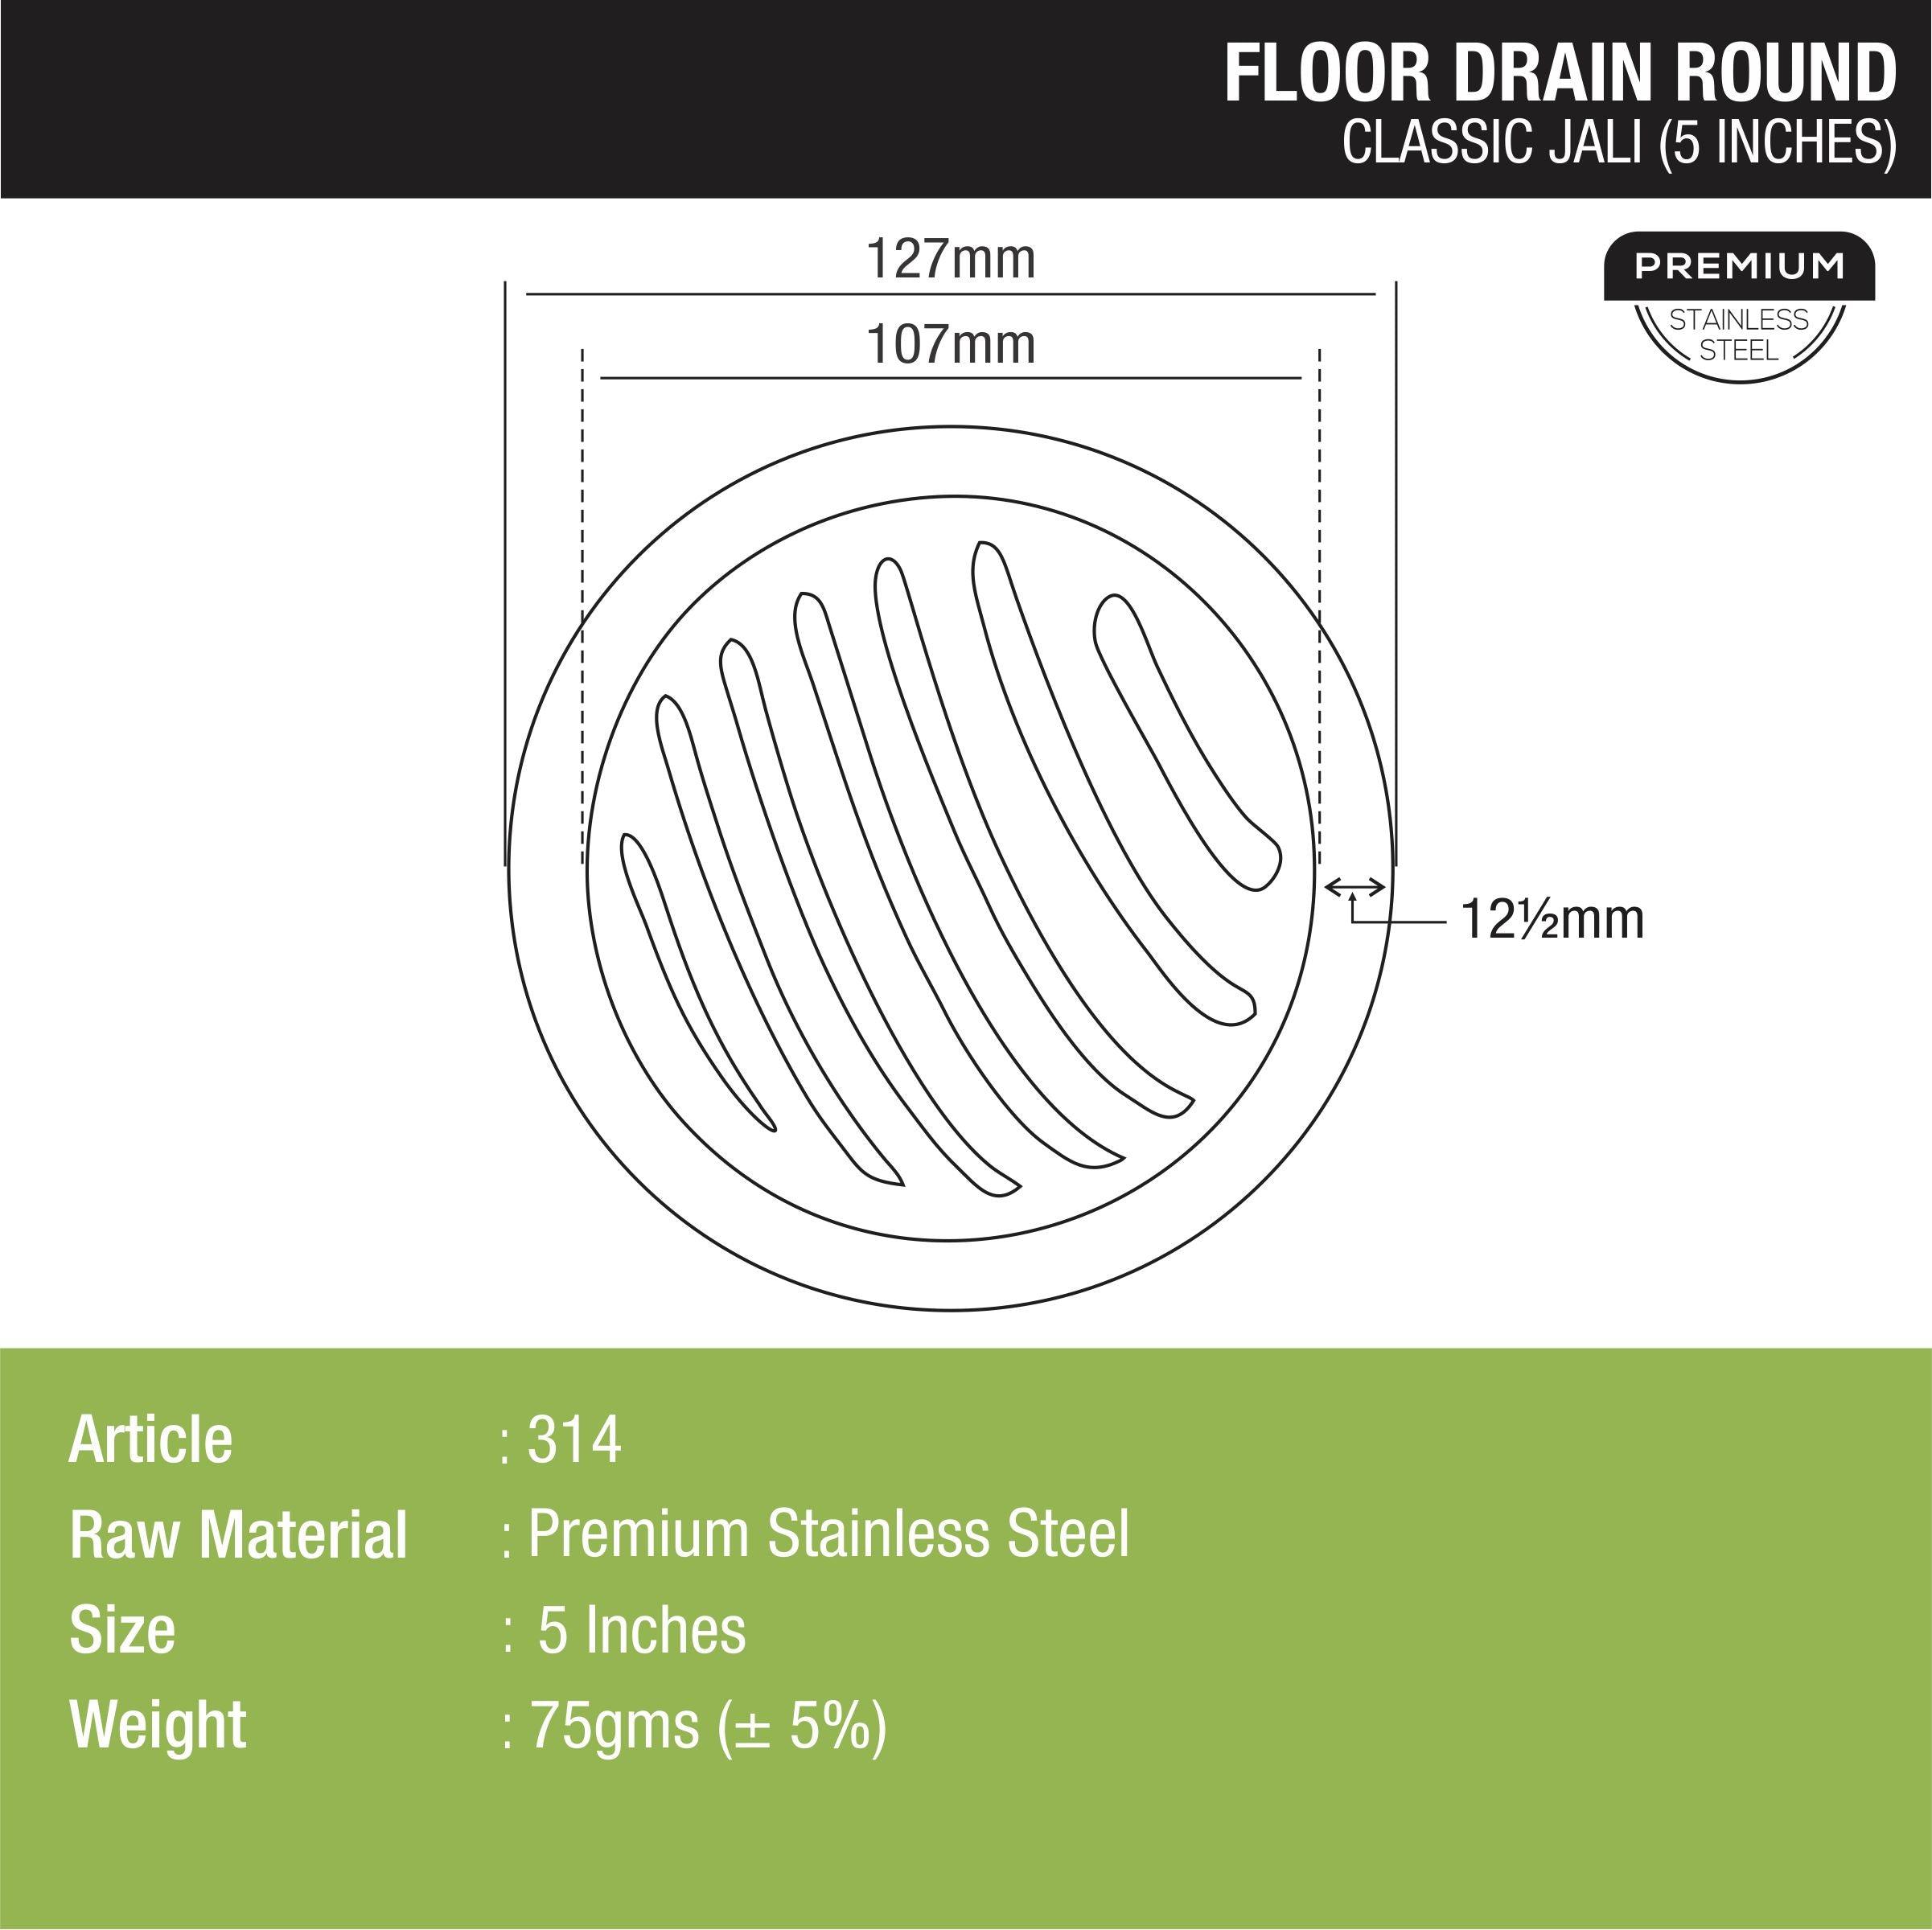 Classic Jali Round Floor Drain (5 inches) dimensions and sizes